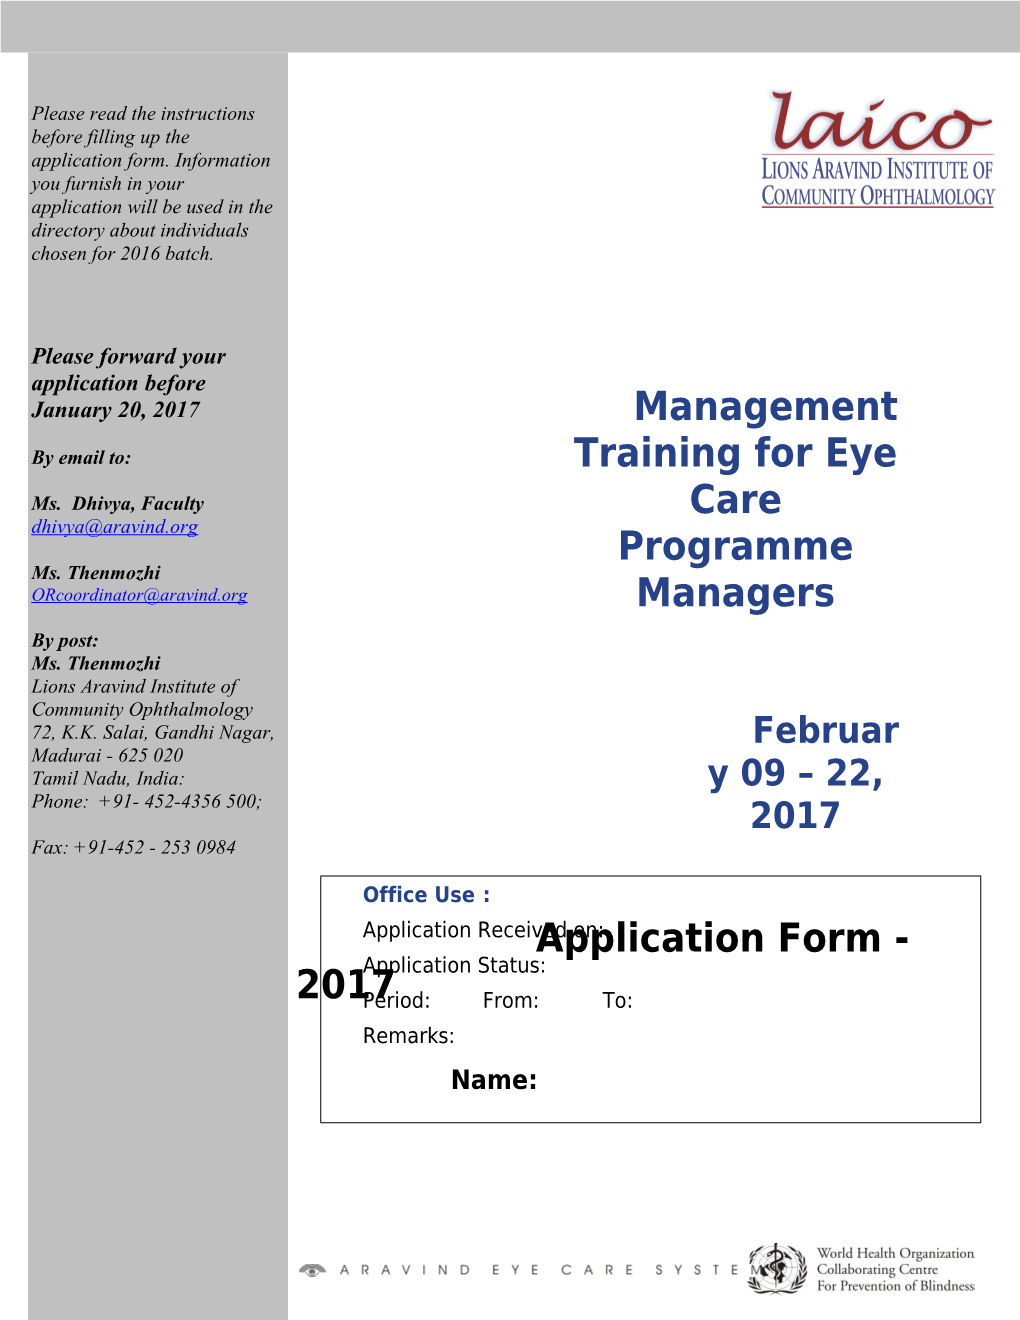 Management Training for Eye Care Programme Managers